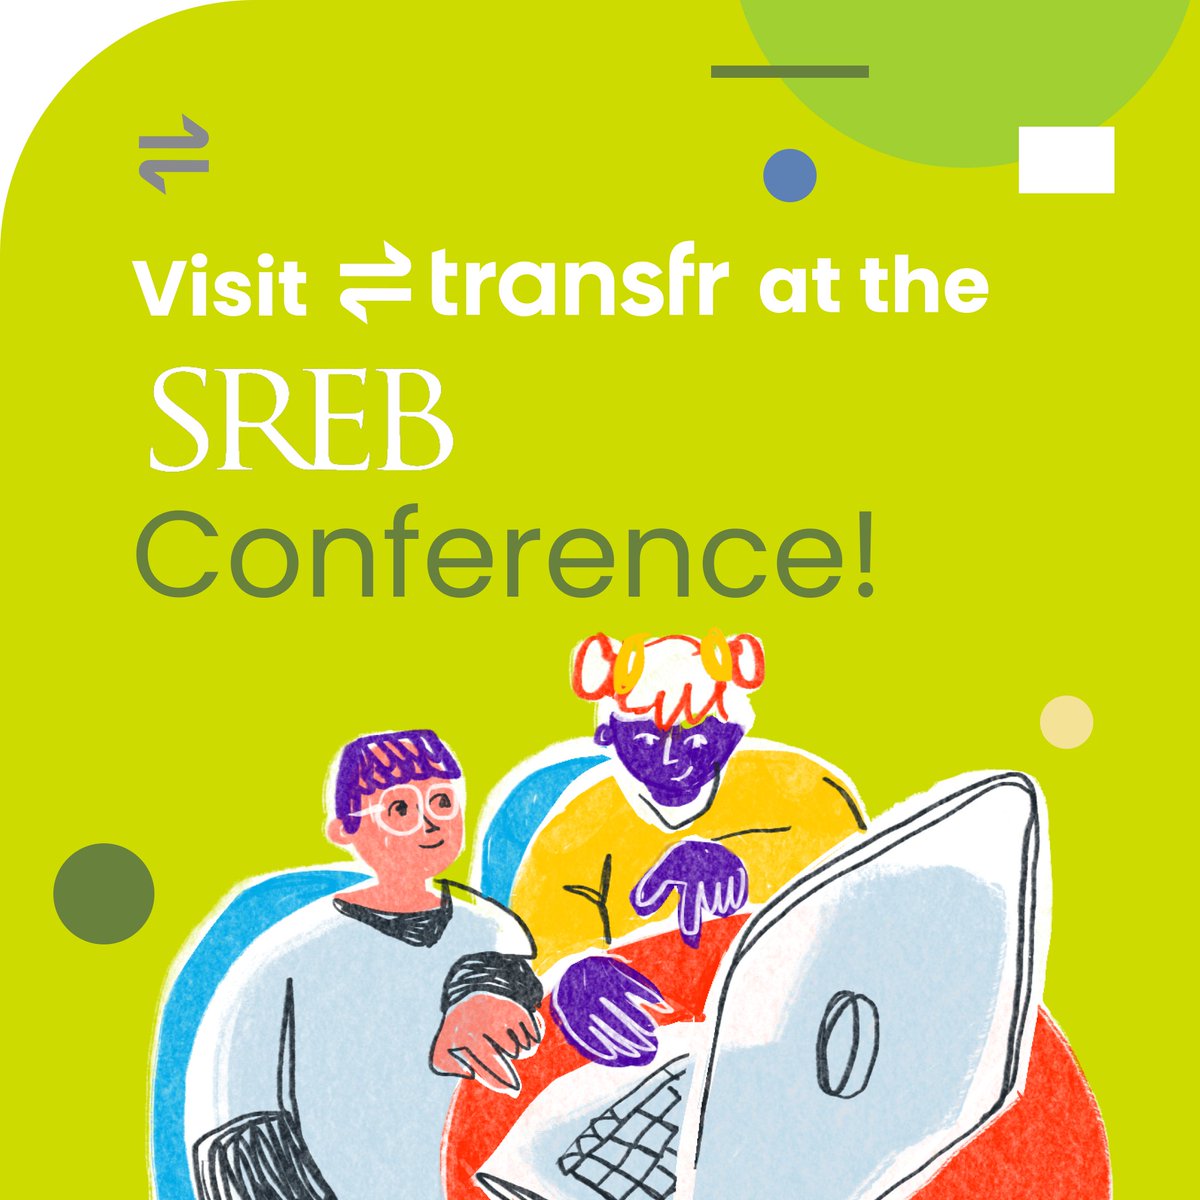 Transfr is live at the SREB Making Schools Work Conference! Join us at our panel session or swing by our booth # 307 to see our simulations in action! 

#transfr #SREB2022 #SREBSummer #SREB #MakingSchoolsWork #GrapevineTX #skills  #education #careers #vr #learning